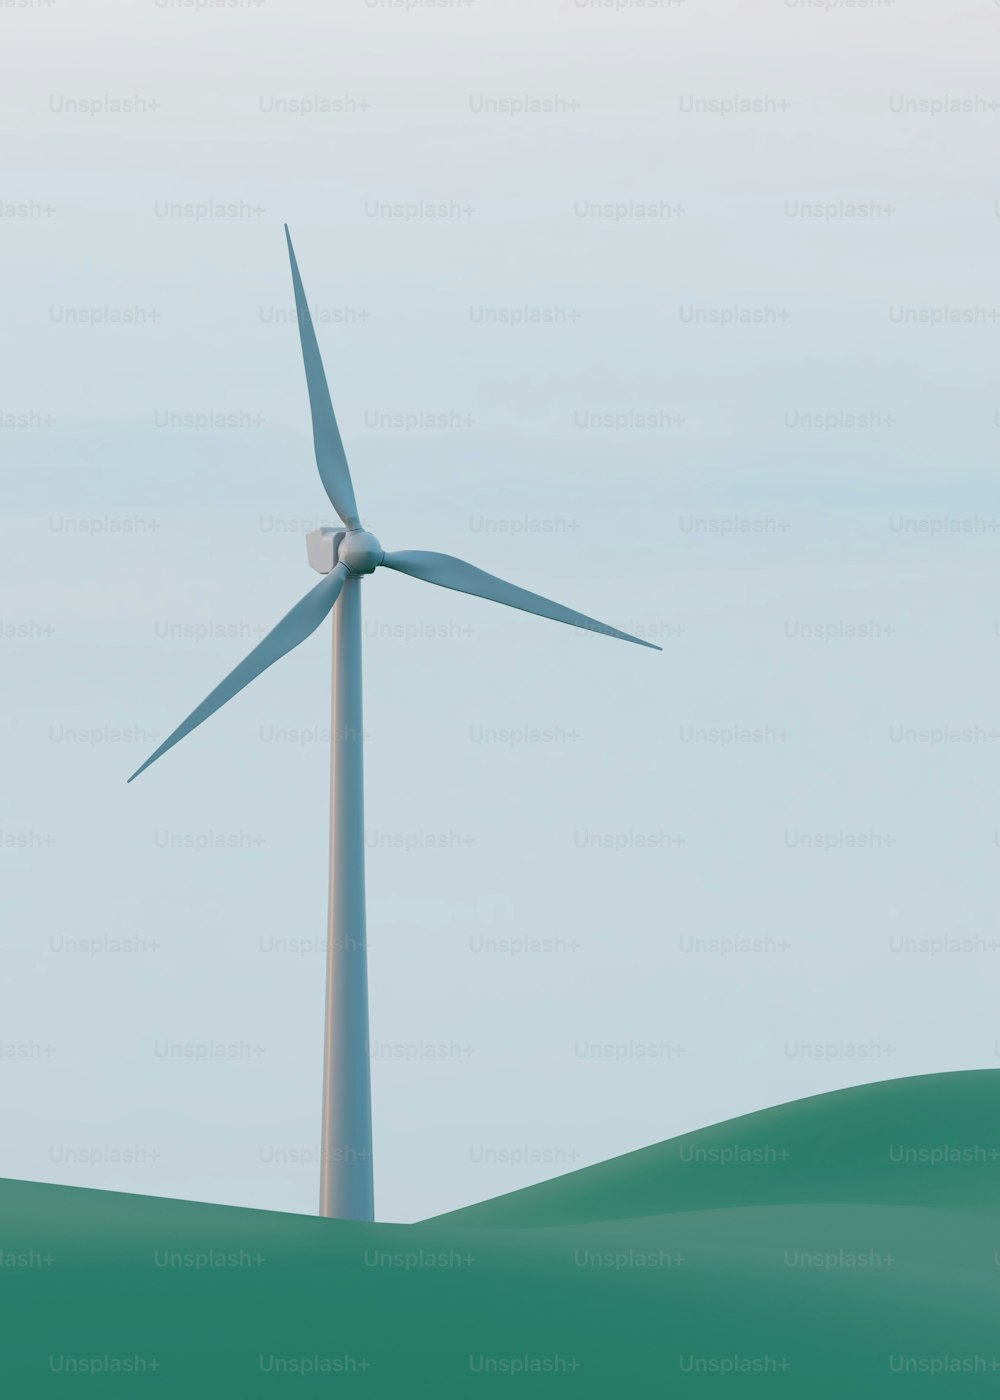 a wind turbine in the middle of a green field